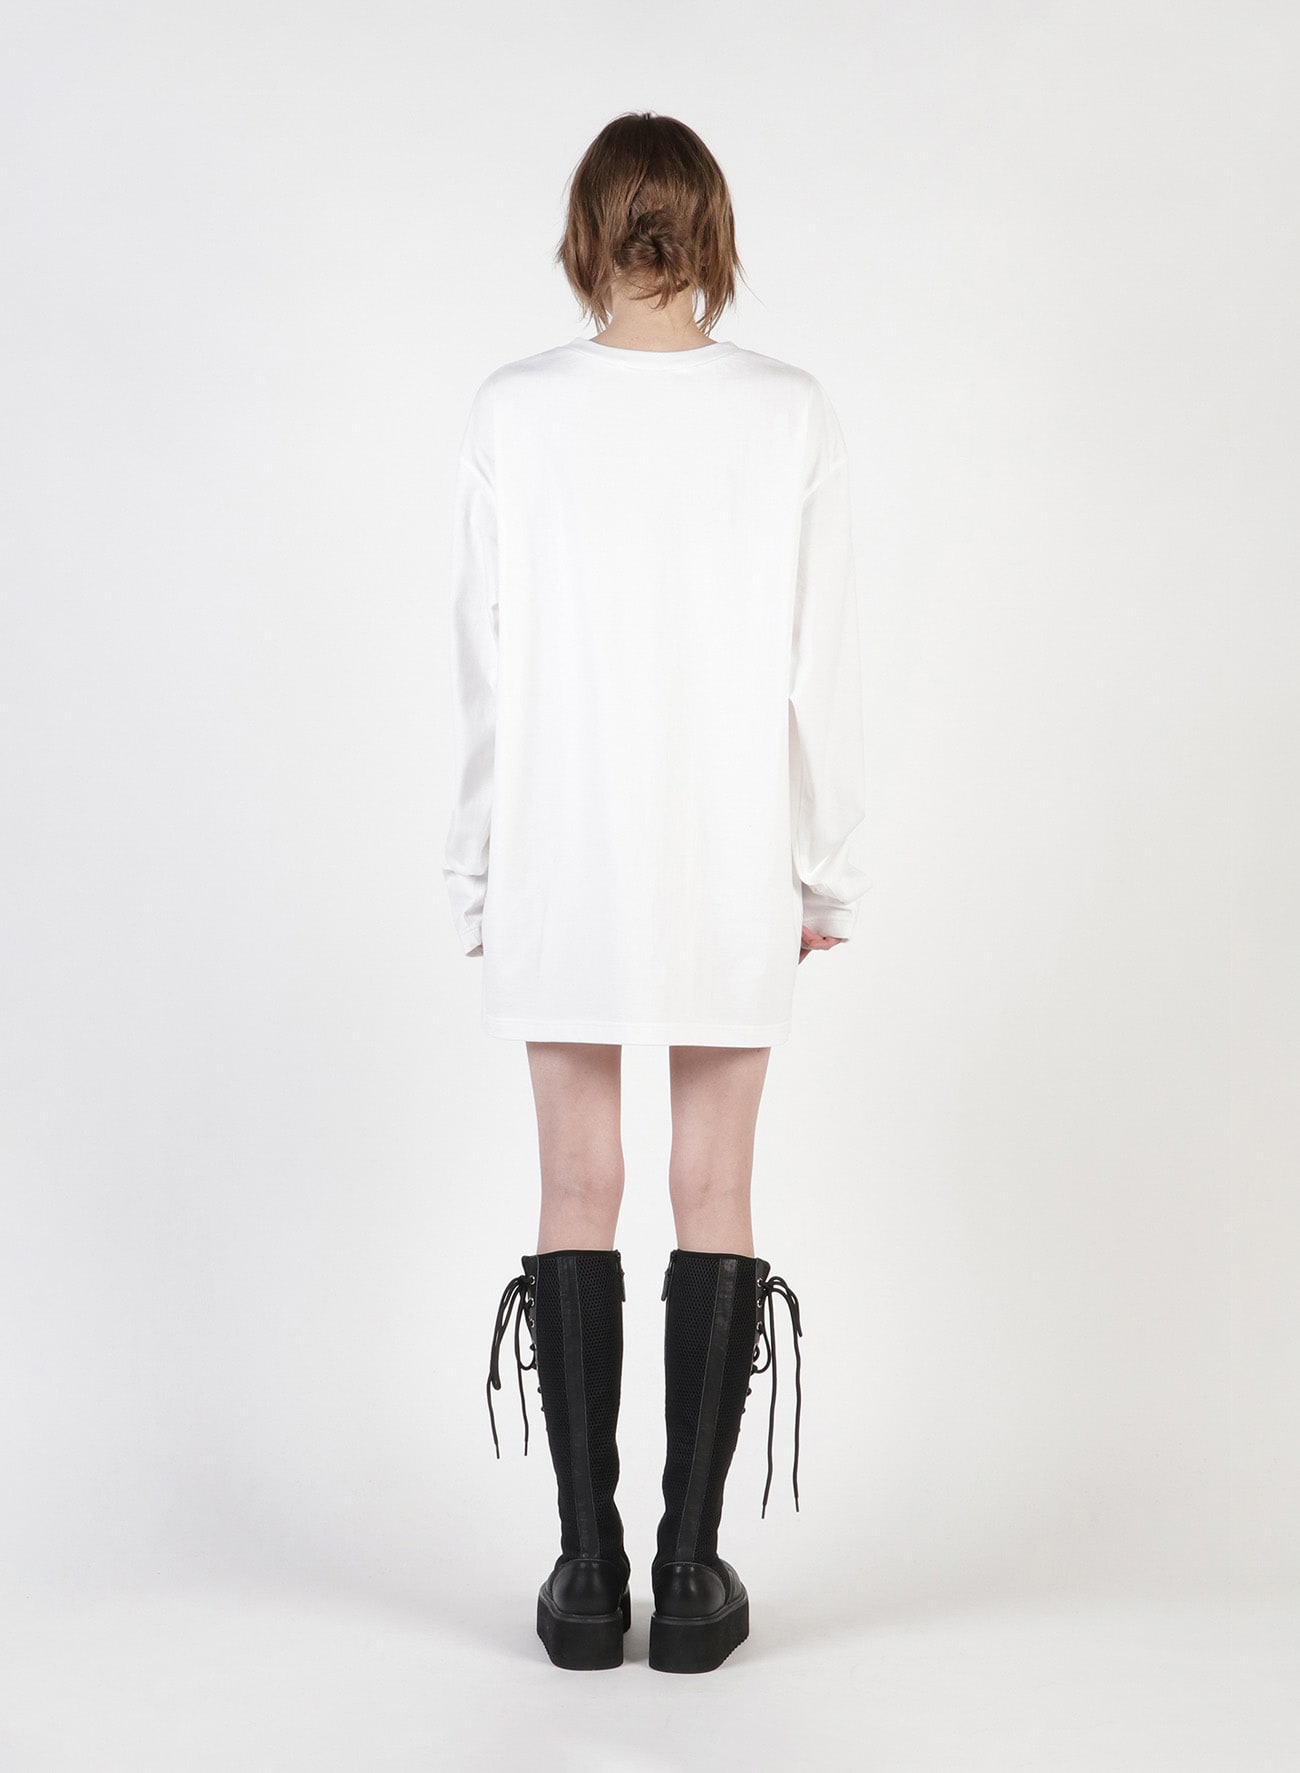 THE SHITS Embroidery Oversized Long T-Shirt